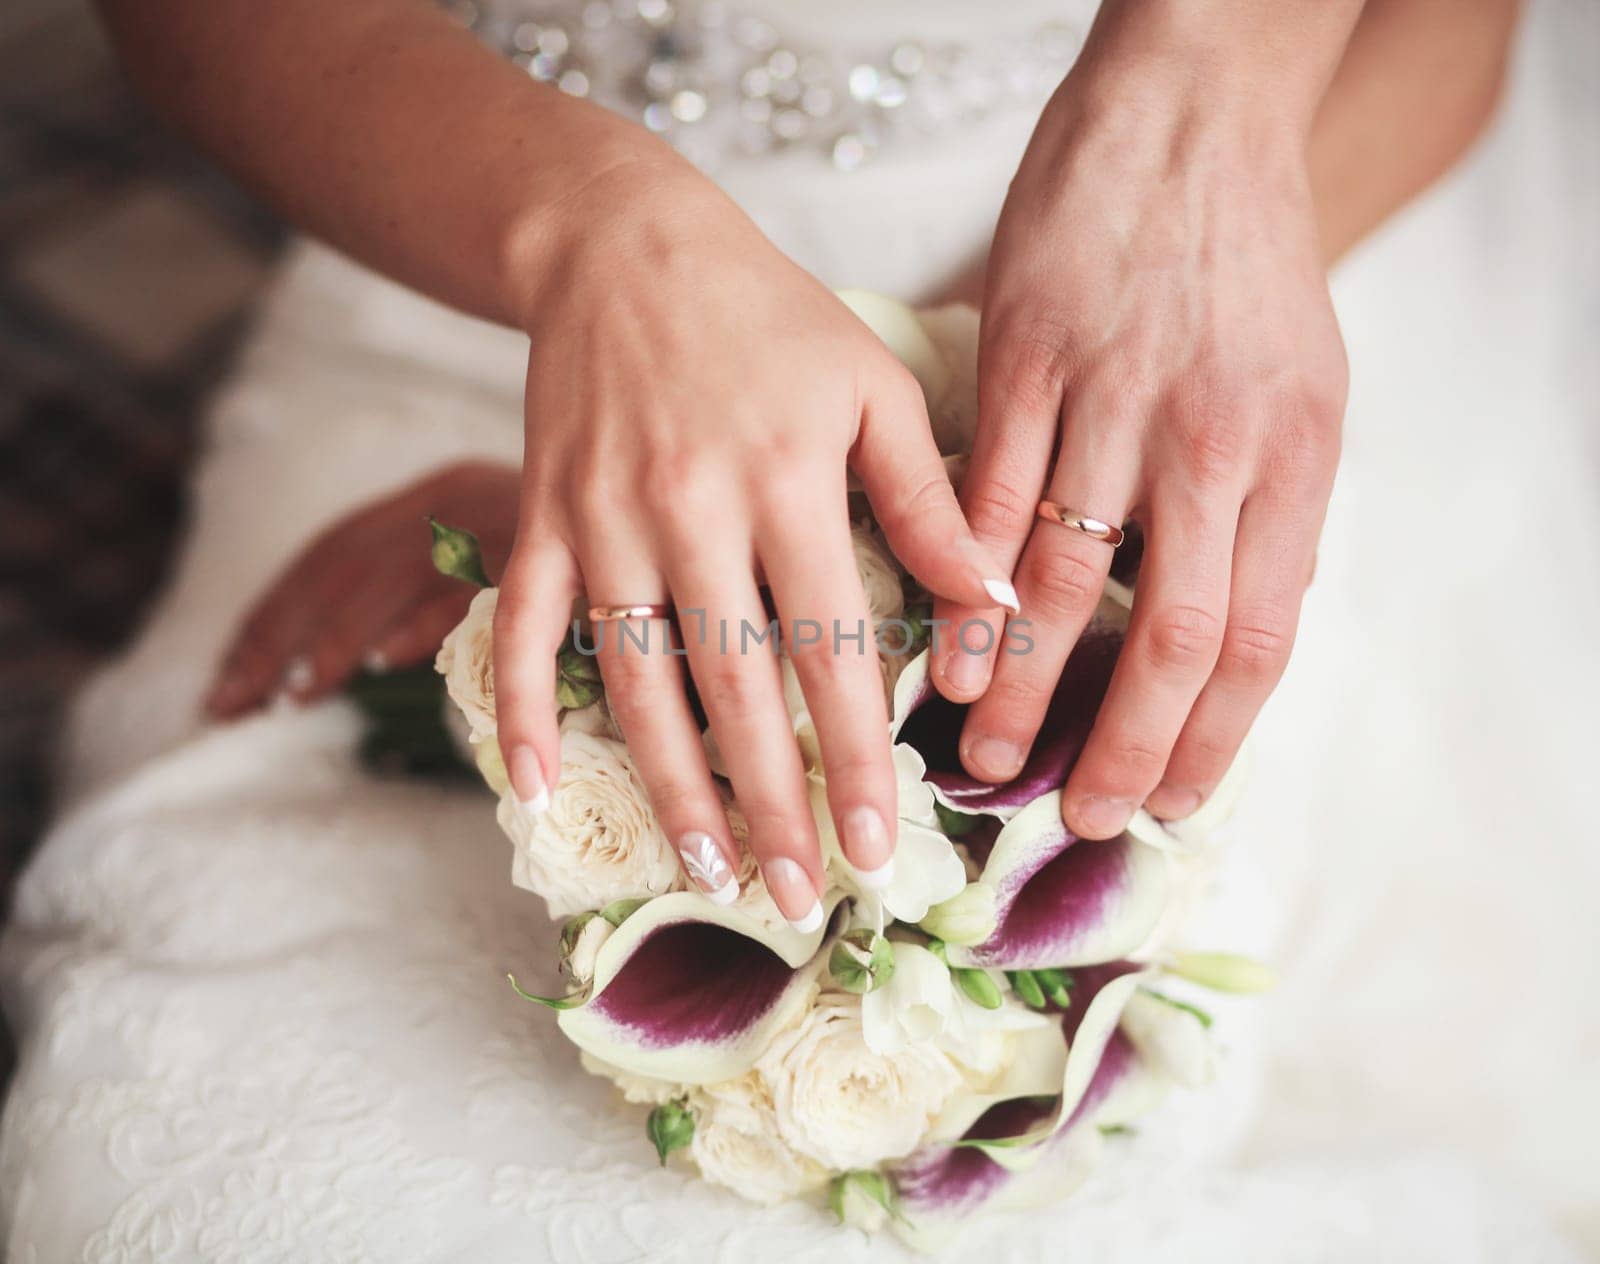 hands of the bride and groom with rings on the background of the wedding bouquet